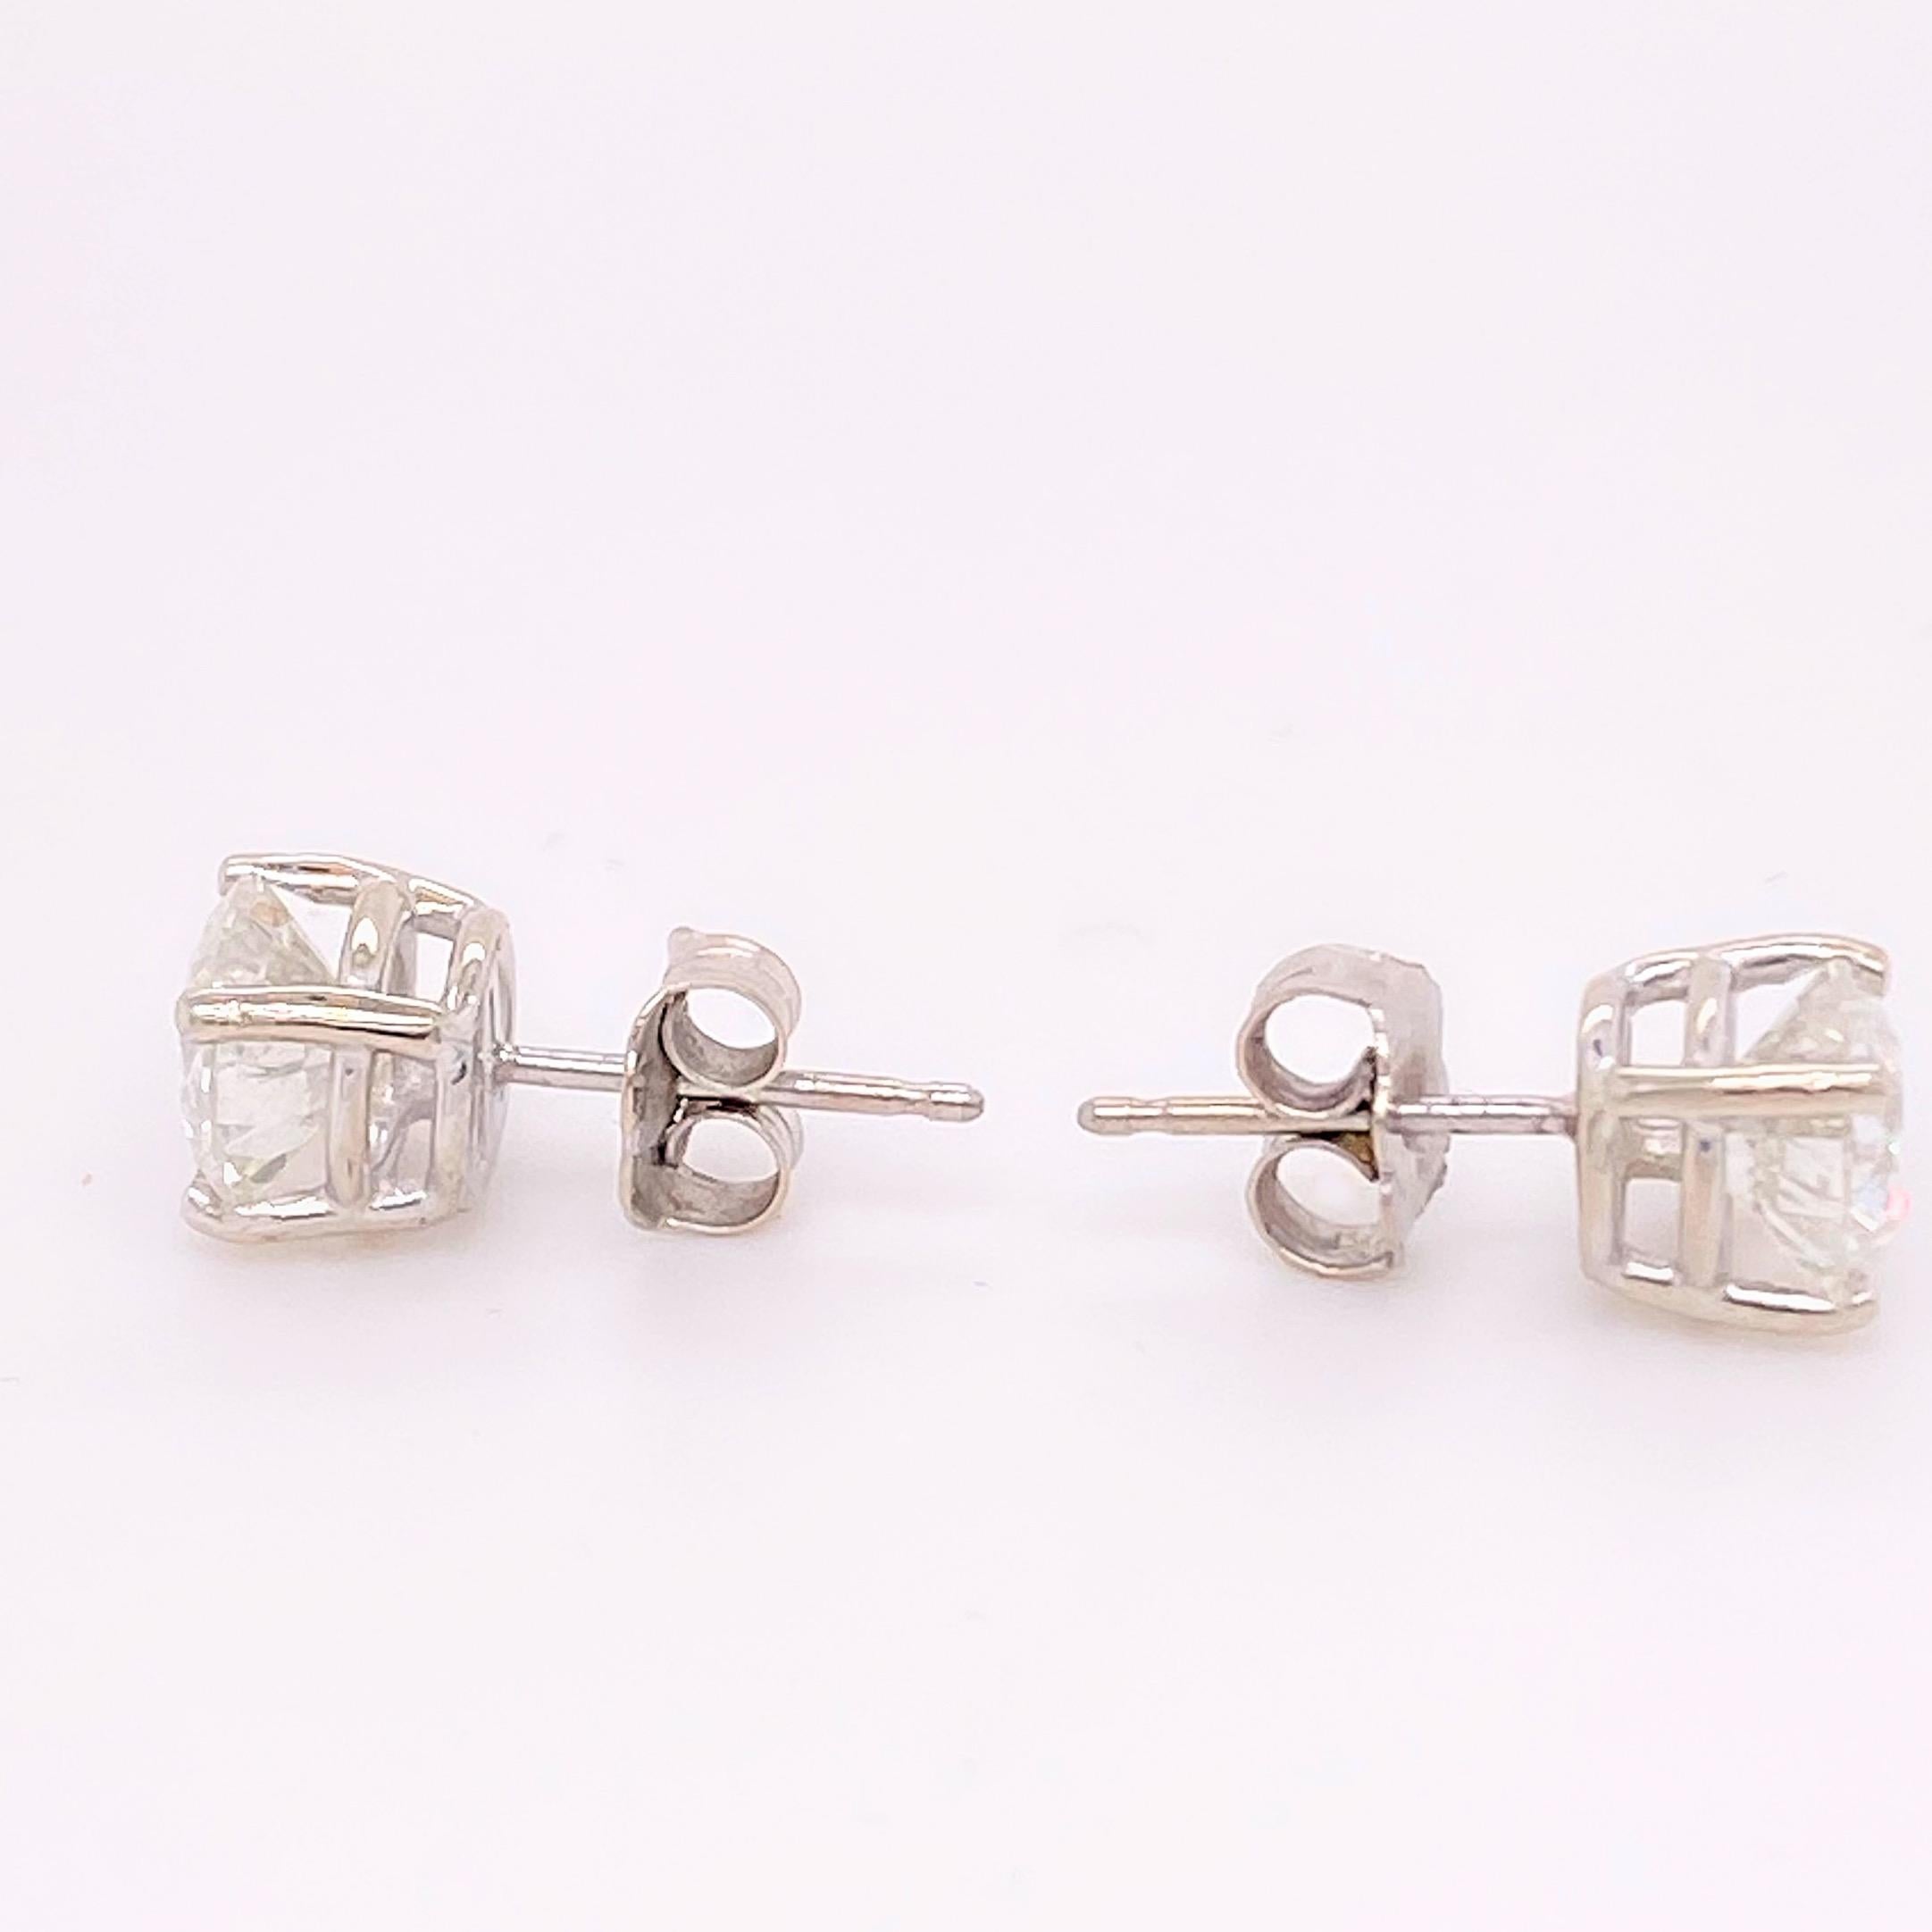 Diamond Stud Earrings
Style:  Basket Settings with Friction Backs
Metal:  14K White Gold
TCW:  2.04 Carats Total
Diamonds:  2 Round Brilliant Cut Natural Diamonds
Color & Clarity:  I color,  I1 clarity
Hallmark: 14K
Includes:  Certified Appraisal,